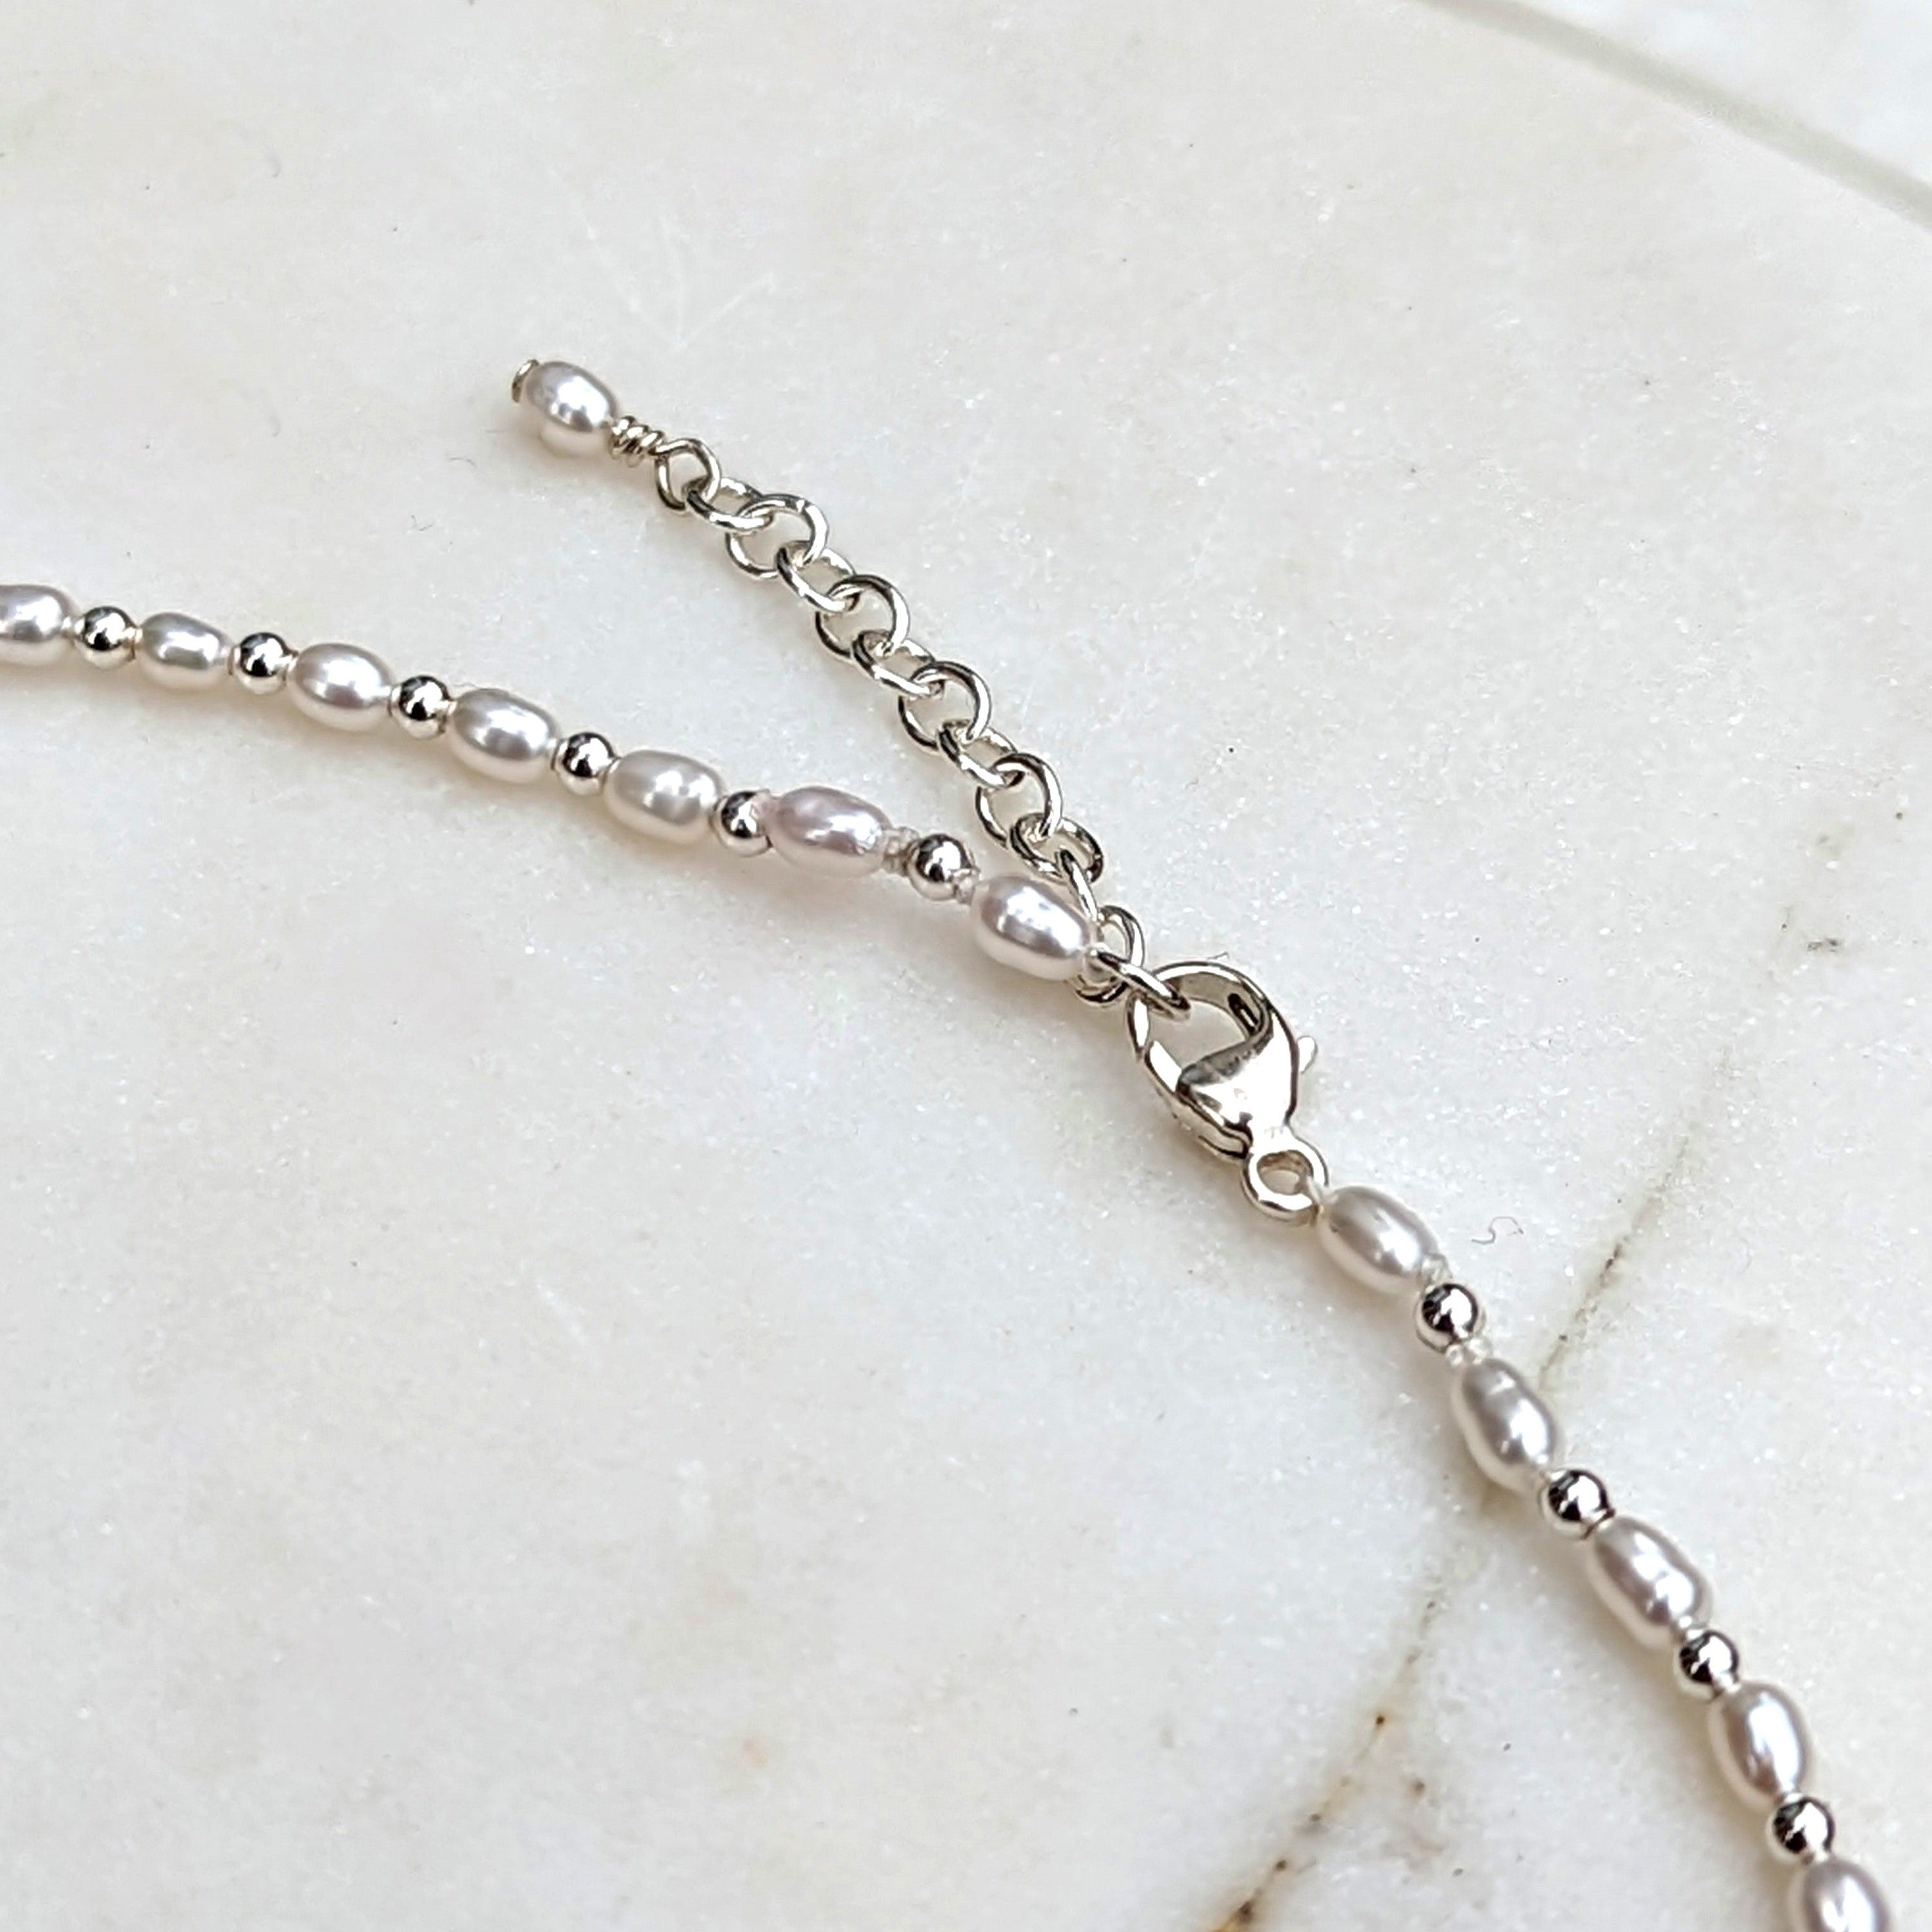 Closeup of silver clasp and chain of tiny pearl and silver bead necklace